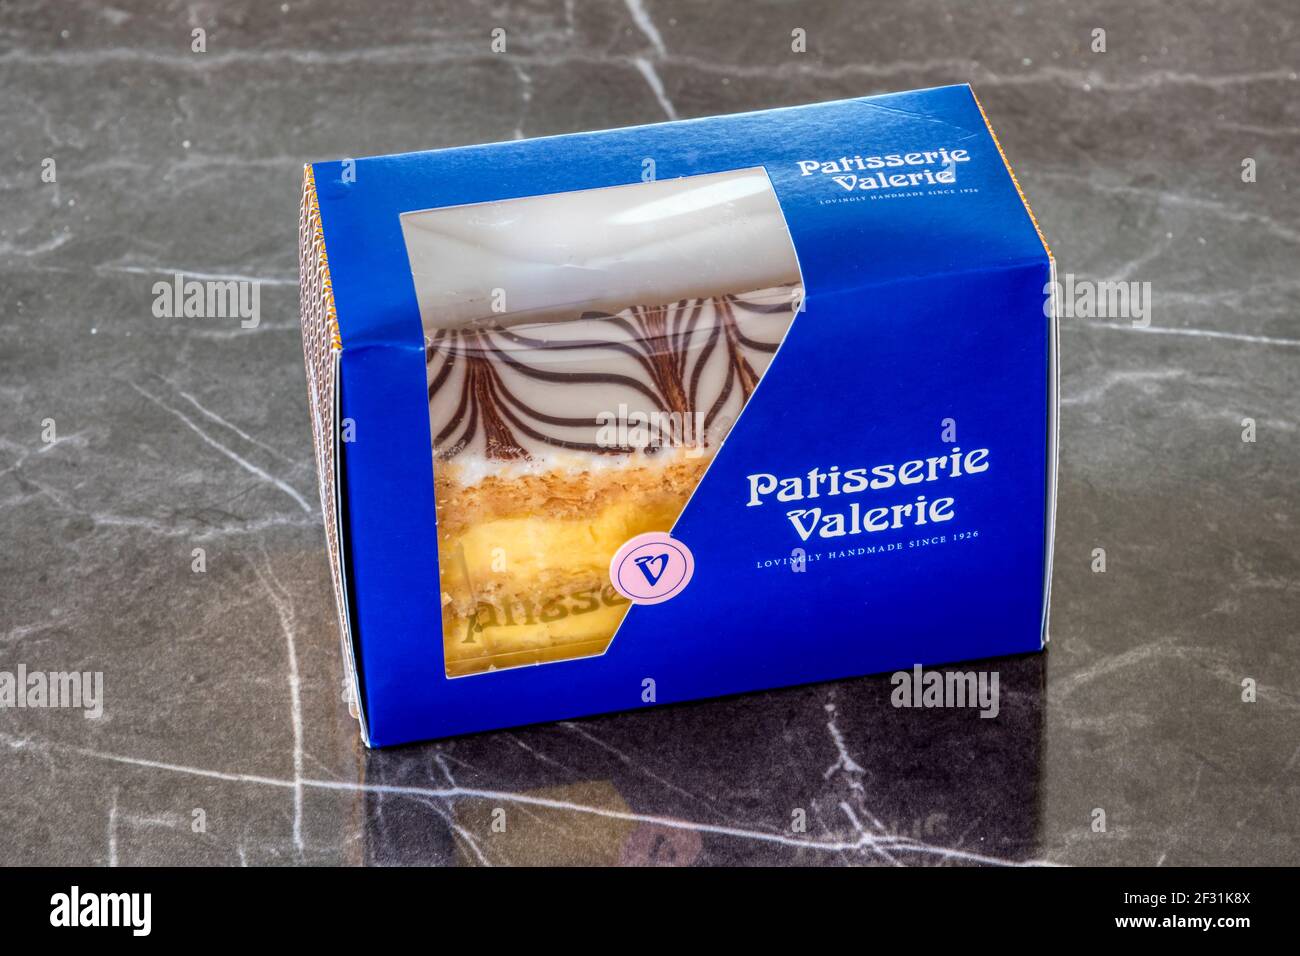 A Patisserie Valerie cream slice, sold pre-packaged in a supermarket. Stock Photo